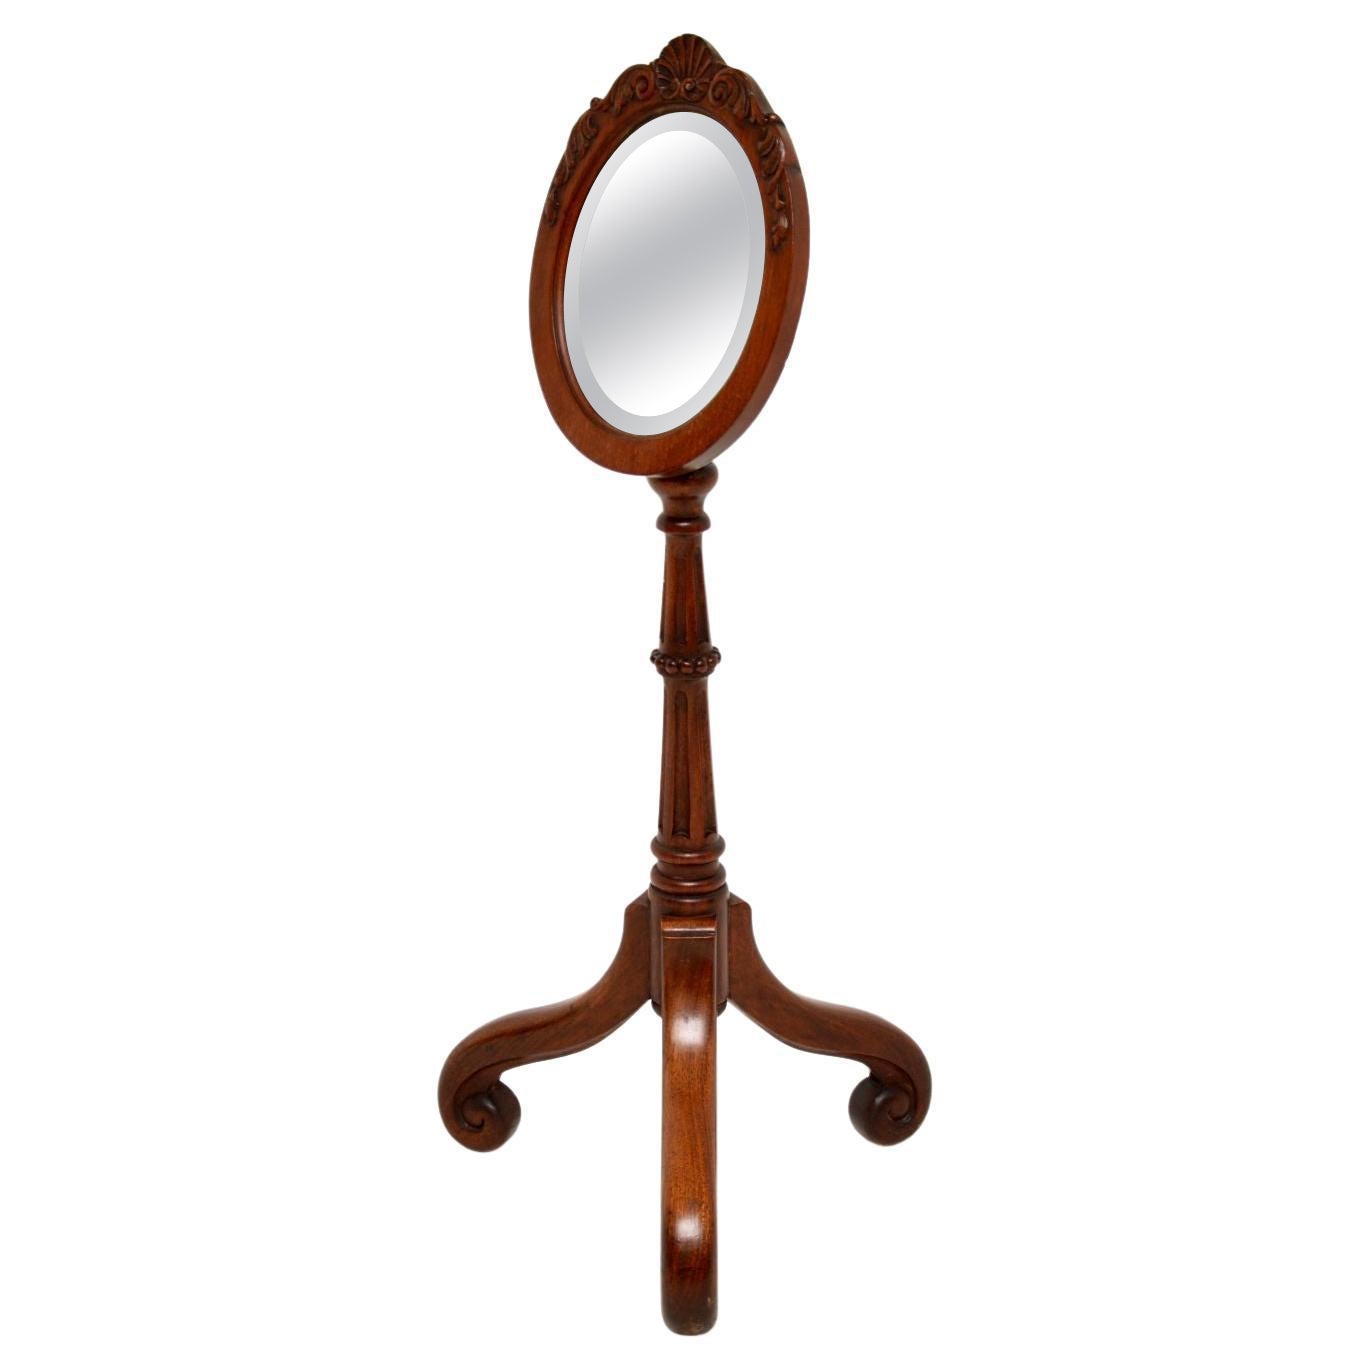 A beautiful and quite charming antique Victorian shaving mirror. This was made in England, it dates from around the 1860-1880 period.

This is of superb quality, and is beautifully carved. The oval mirror sits on a tripod base, the mirror can be